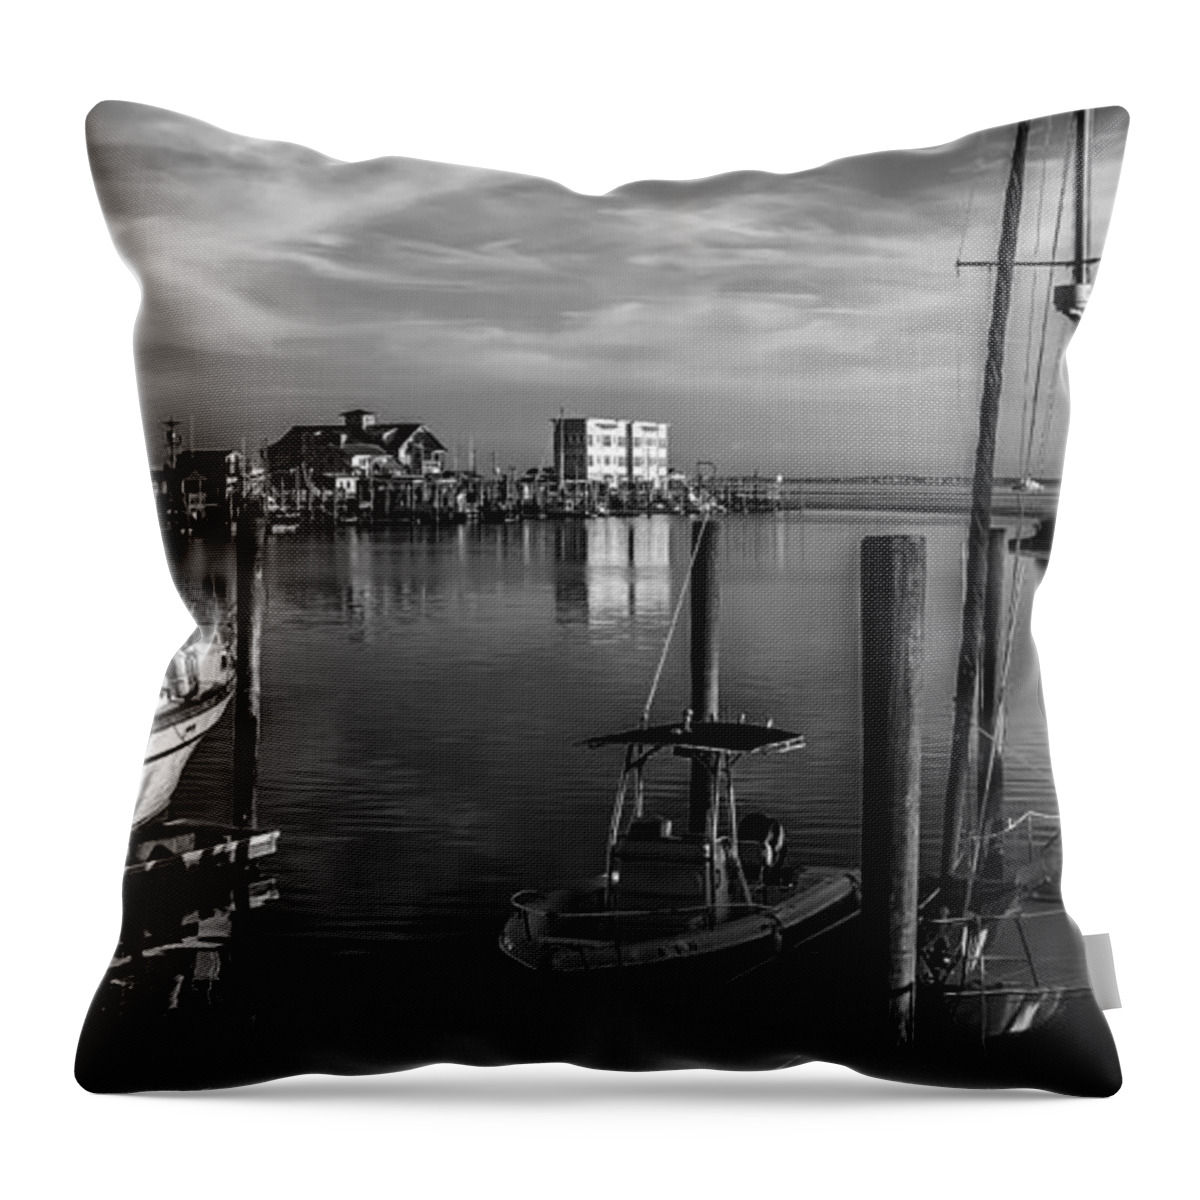 Southport Throw Pillow featuring the photograph Southport Yacht Basic by Nick Noble